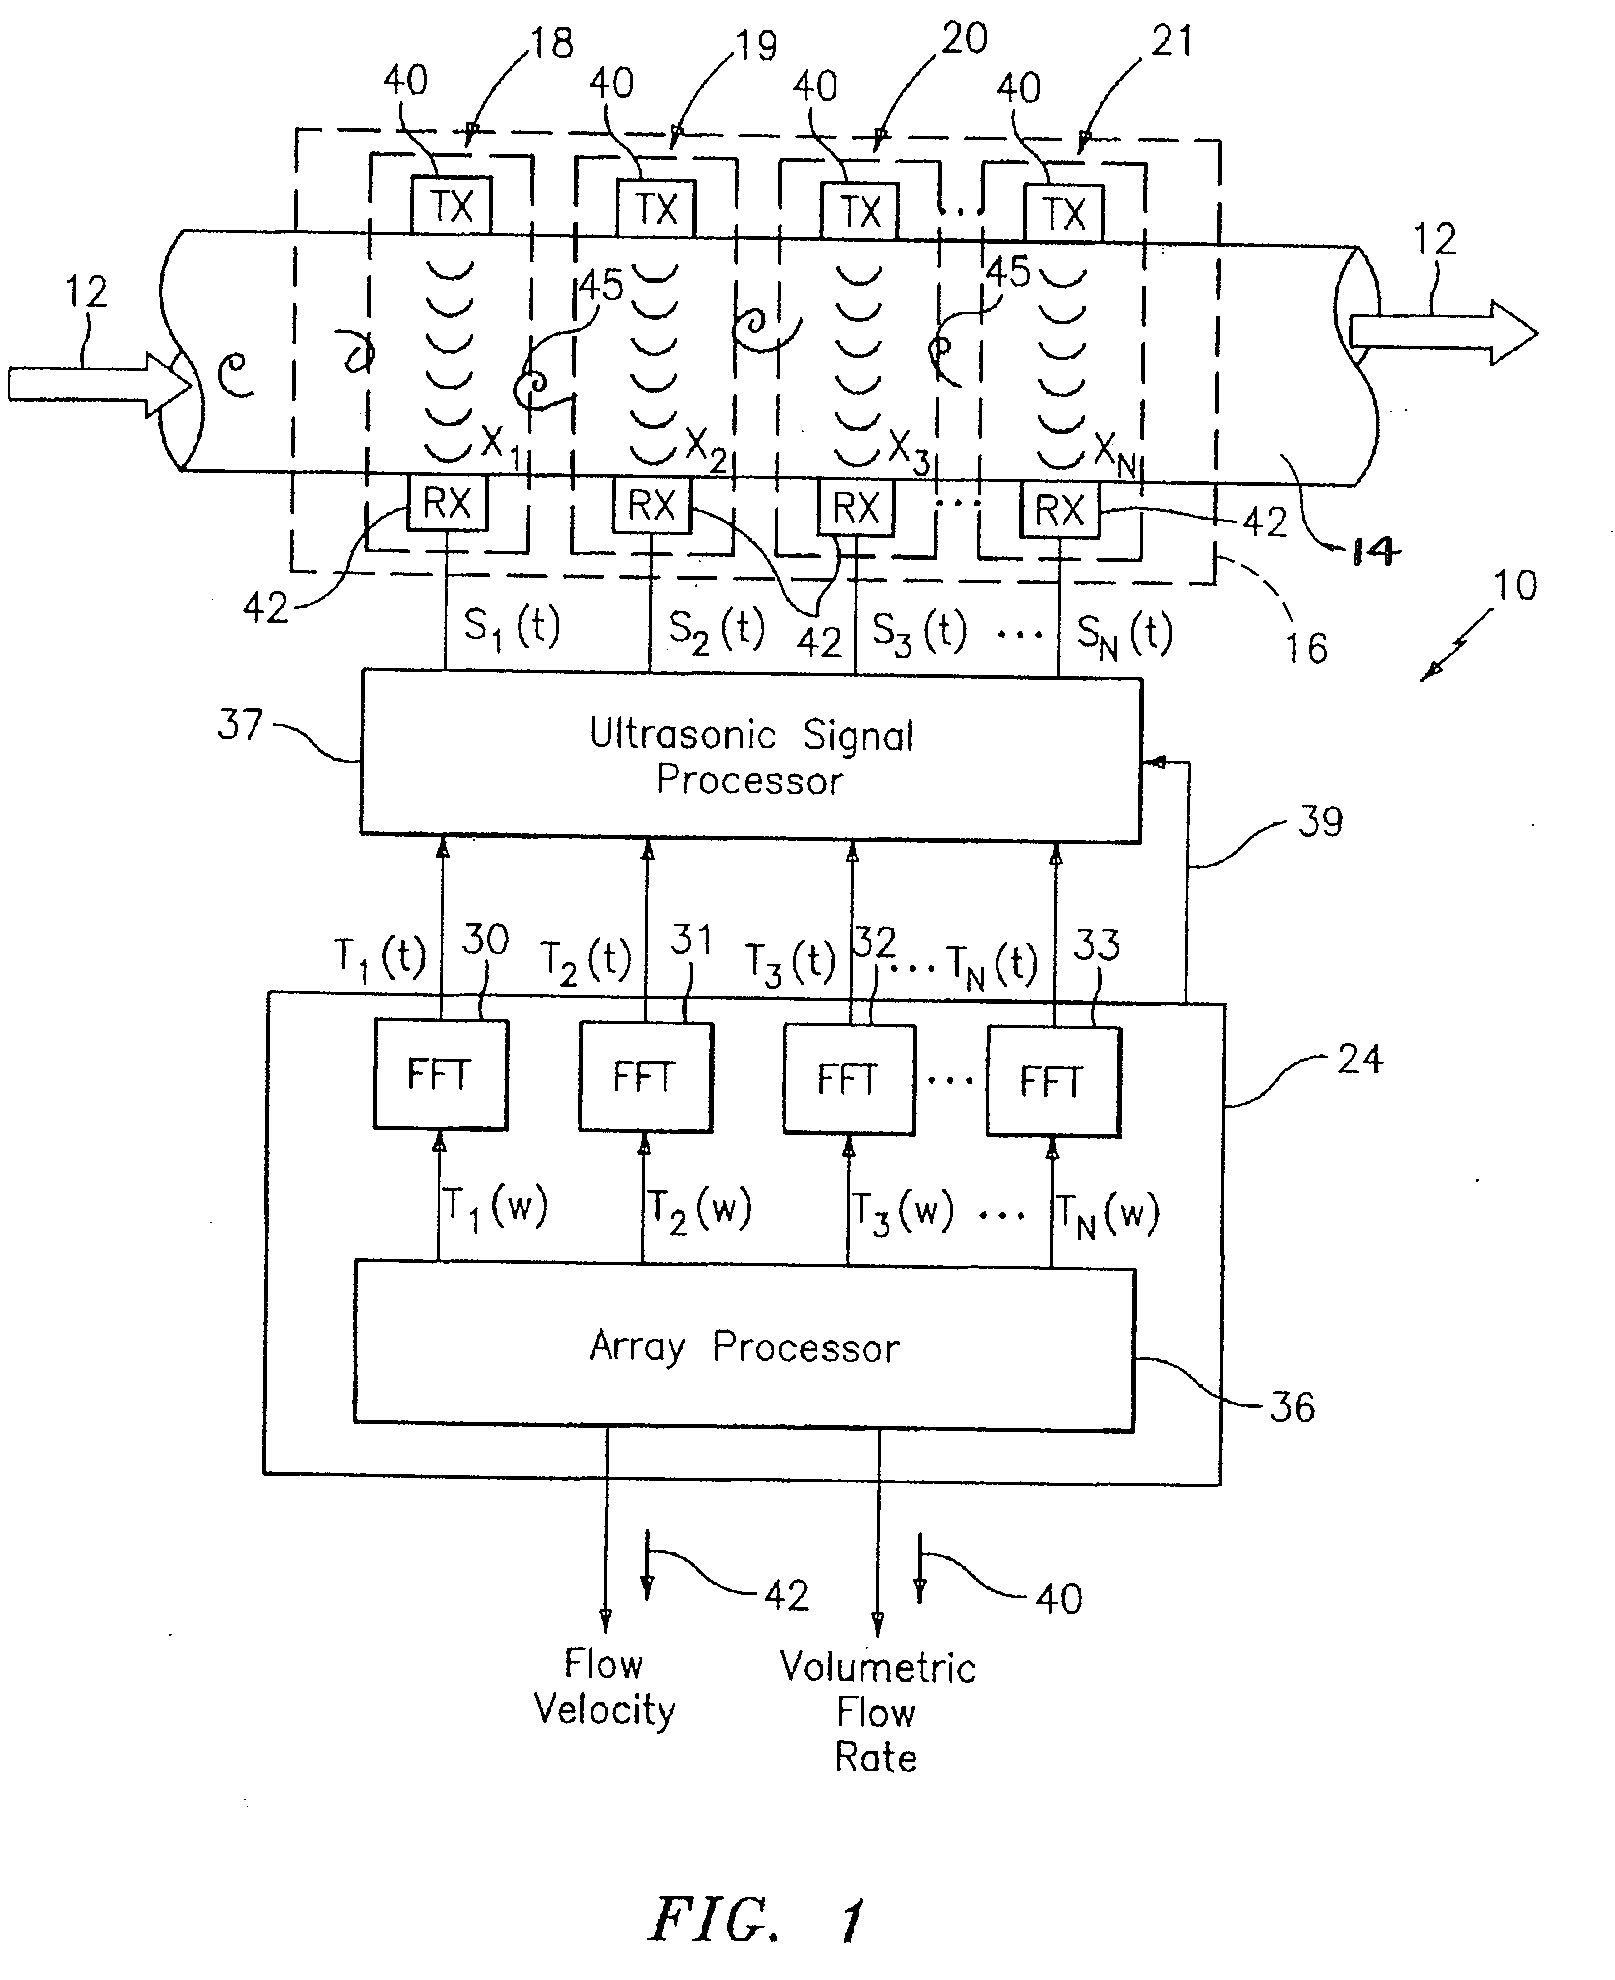 Apparatus And Method of Lensing An Ultrasonic Beam For An Ultrasonic Flow Meter